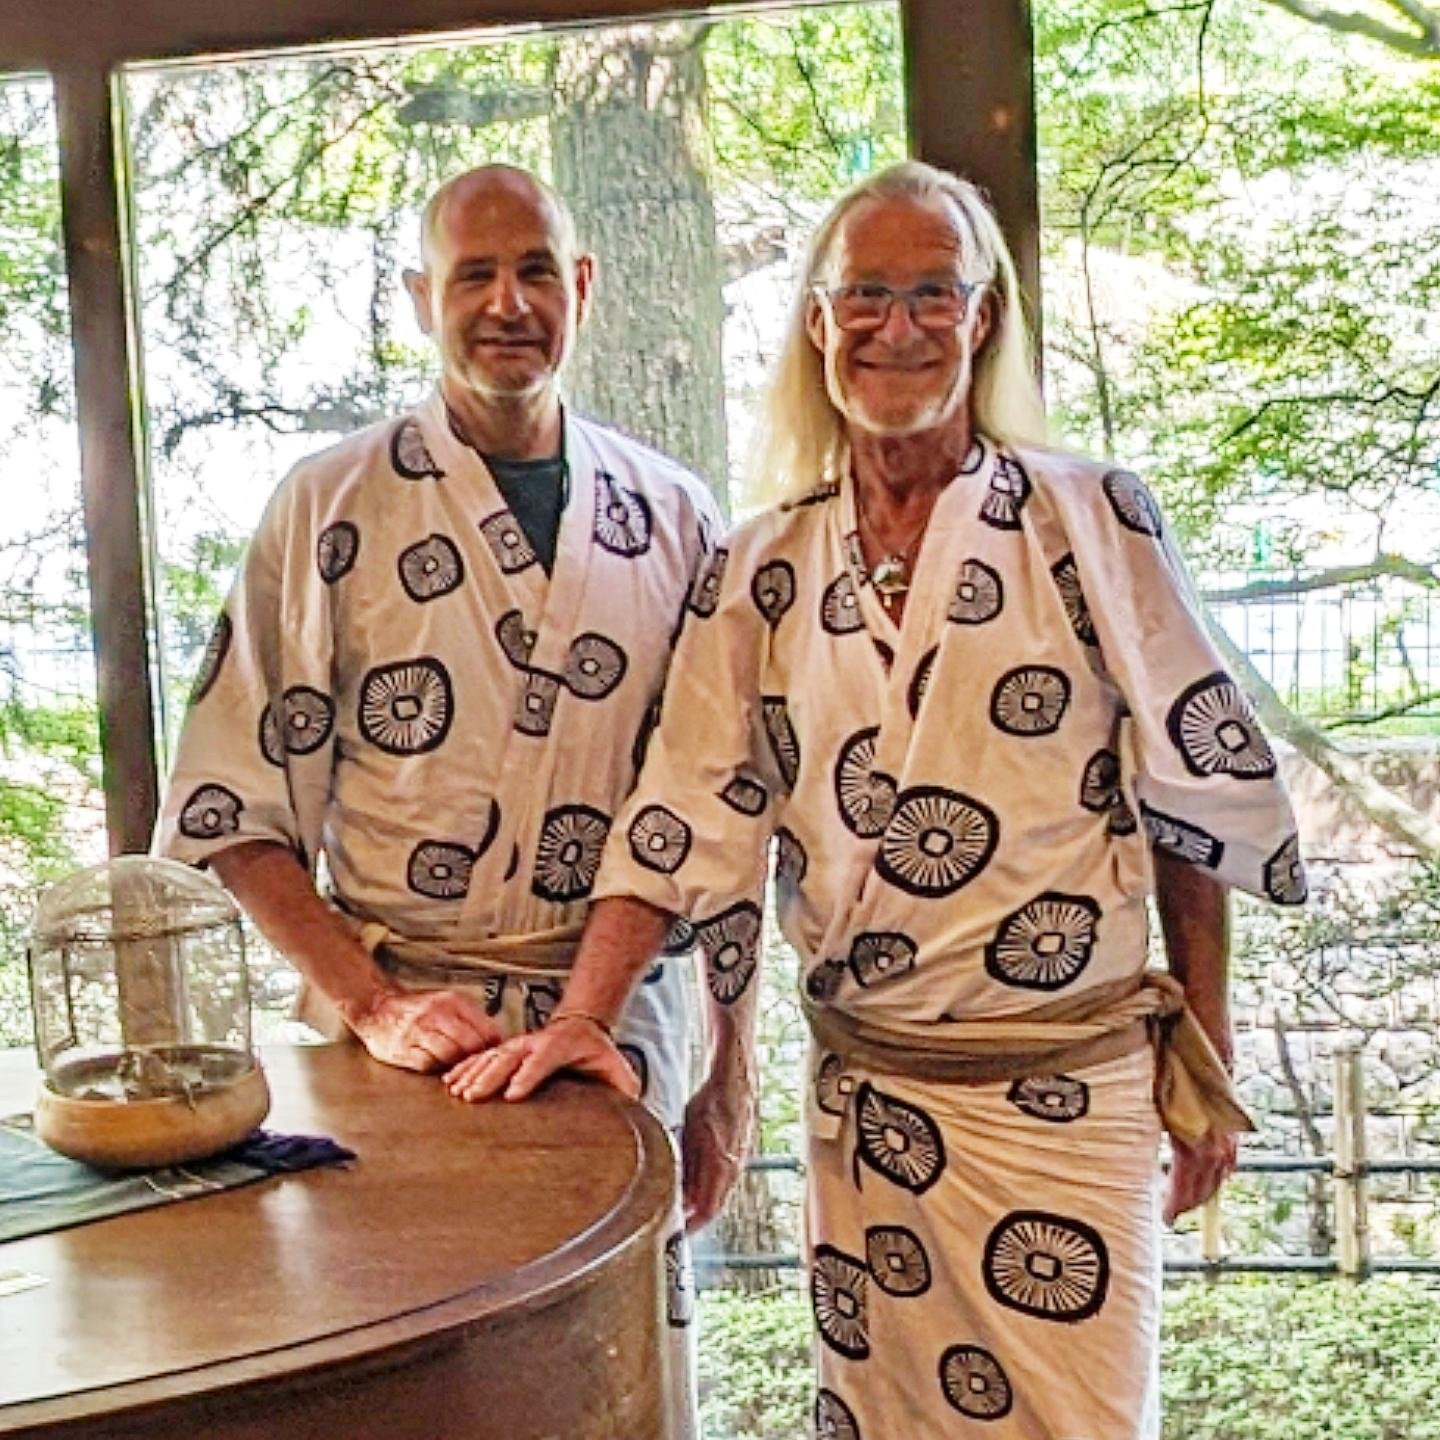 It's just what we needed &mdash; three nights in the spa retreat village of Arima, Japan! ❤️ The soothing, rich wooden interior of our accommodations, Tocen Goshoboh, invited us to soak in the healing waters.  Three times a day! It's rather famous da